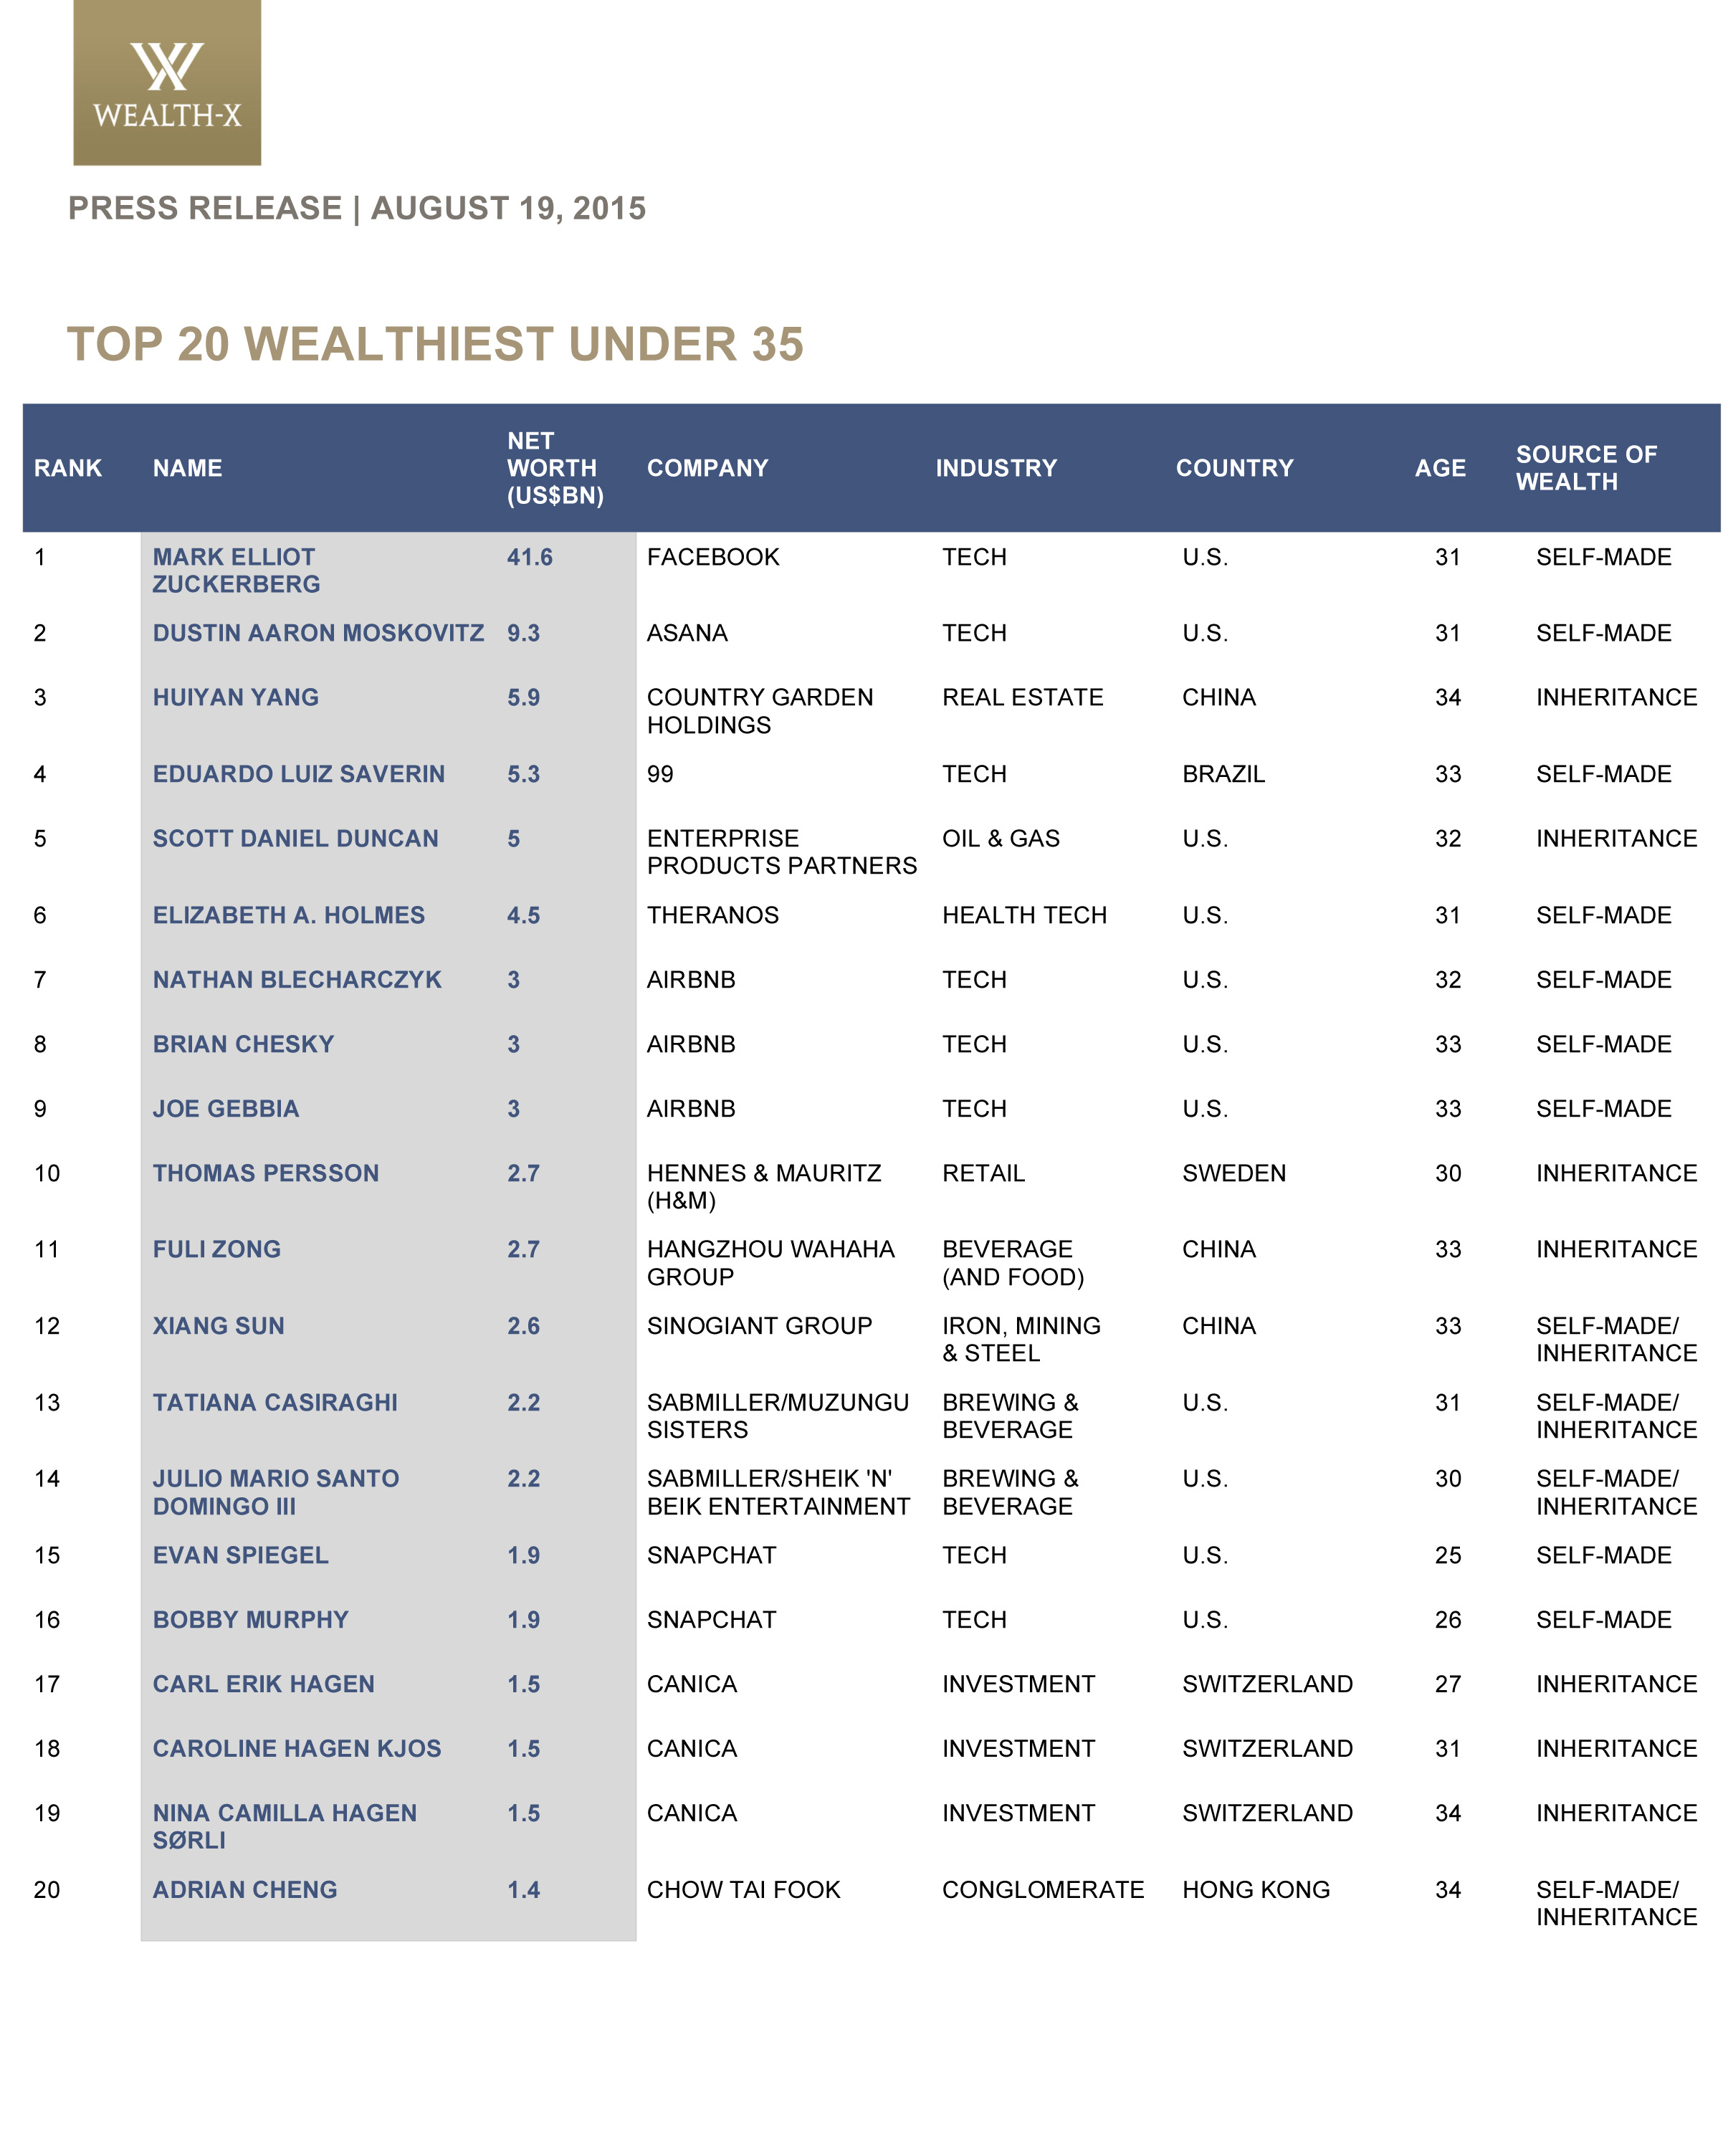 Microsoft Word - Press Release_Top 20 Under 35_Table.docx